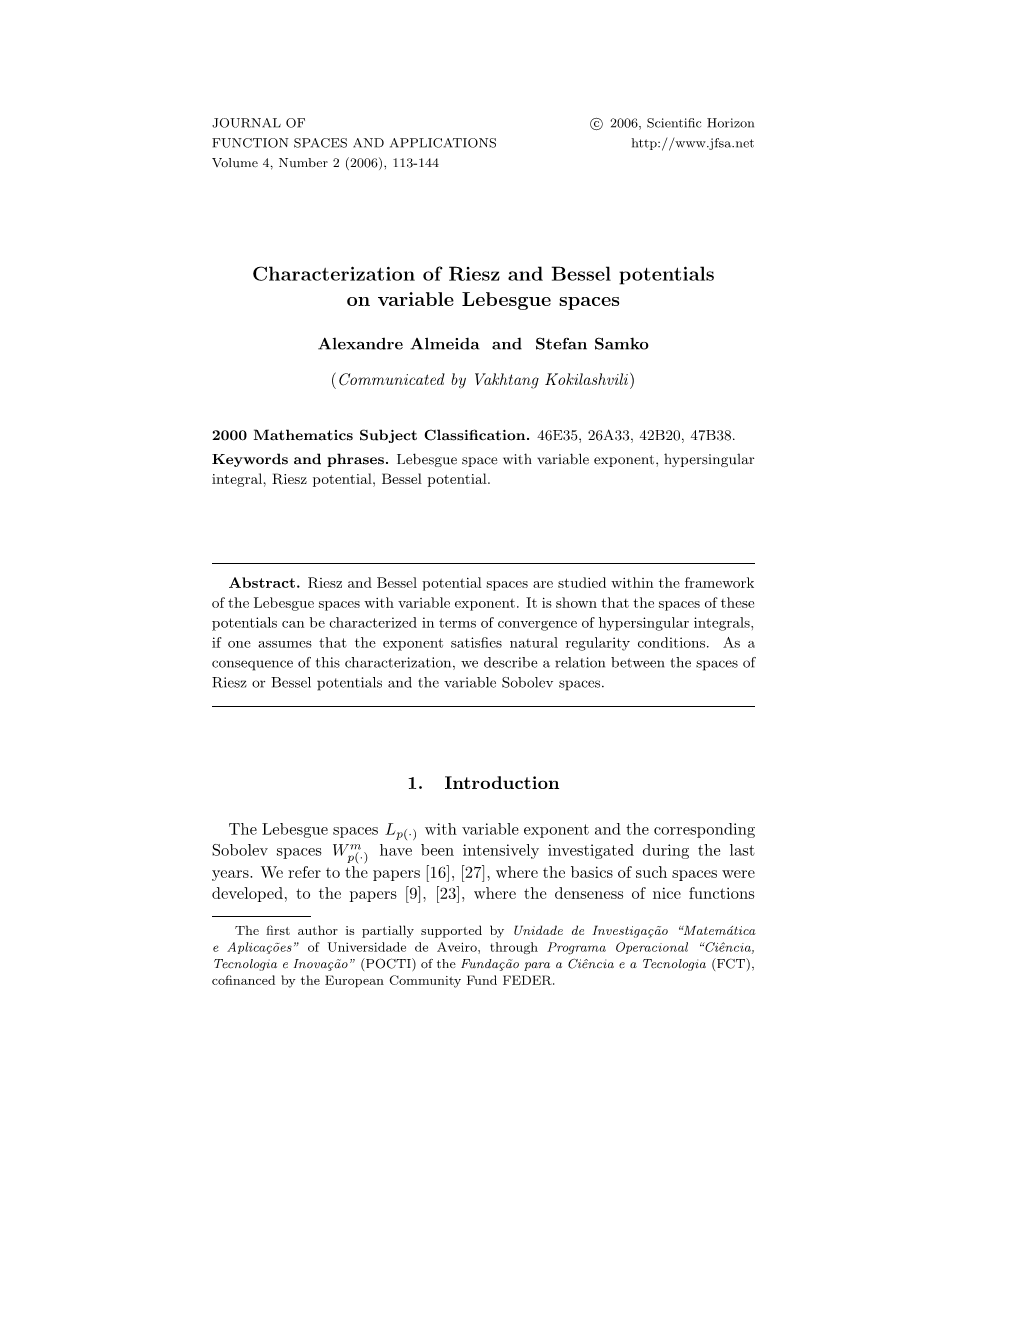 Characterization of Riesz and Bessel Potentials on Variable Lebesgue Spaces